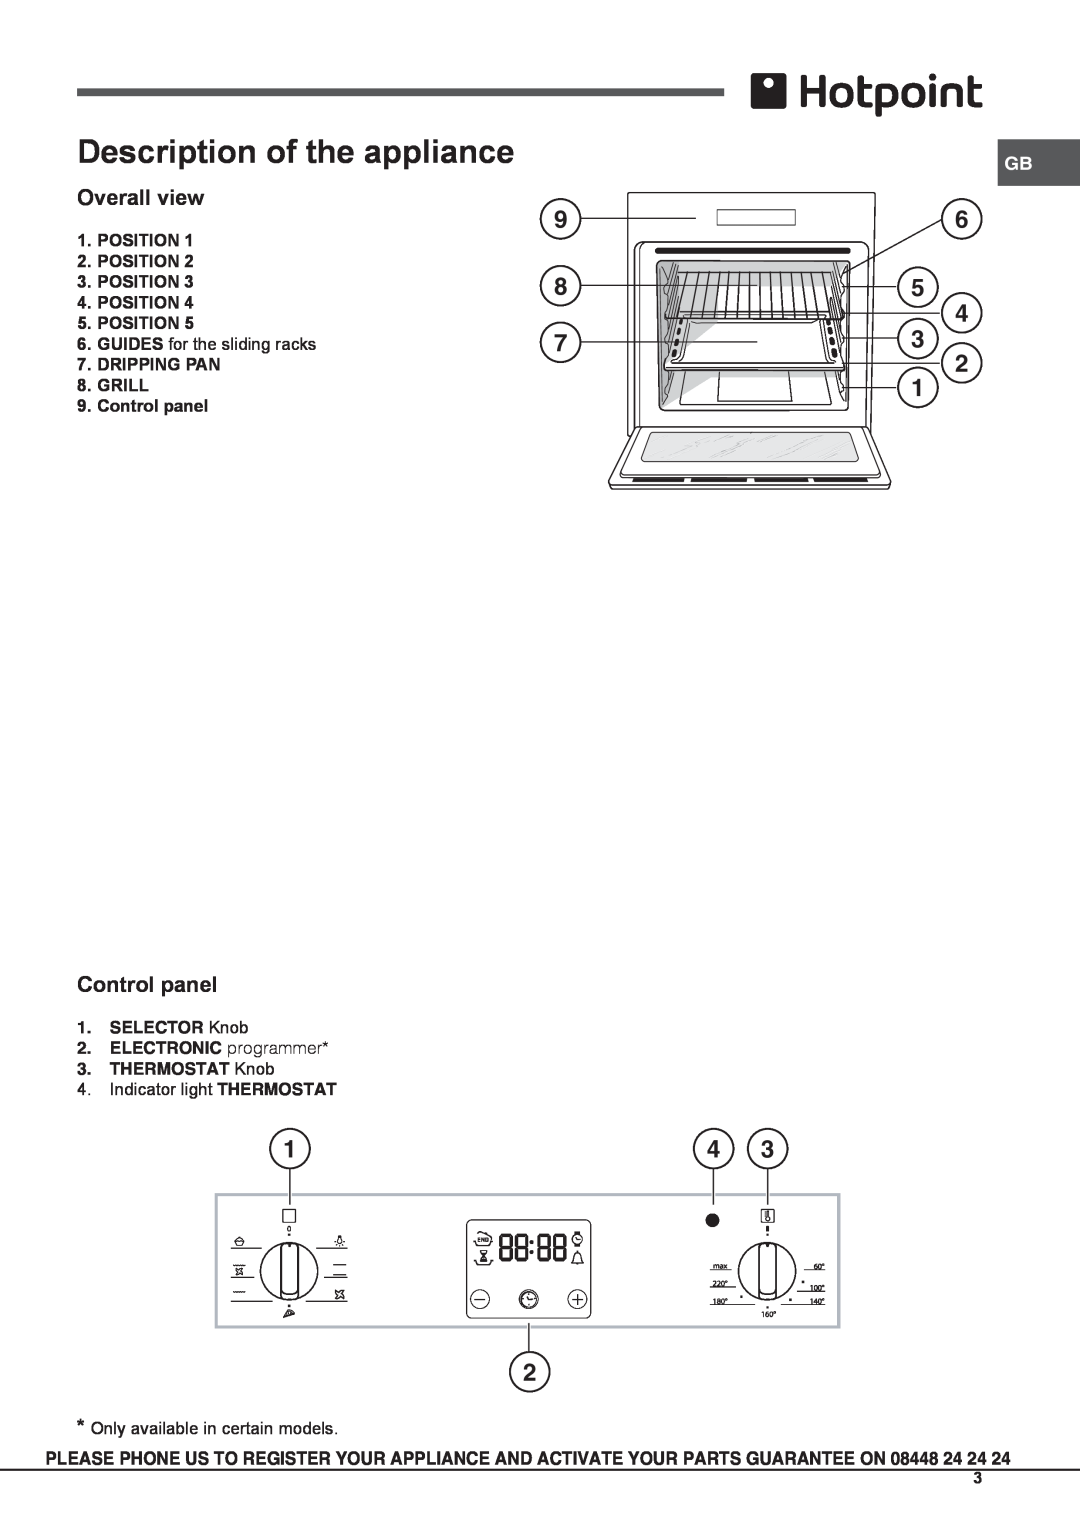 Hotpoint SBS 636 X S Description of the appliance, 6 5, Overall view, Control panel, SELECTOR Knob 2.ELECTRONIC programmer 